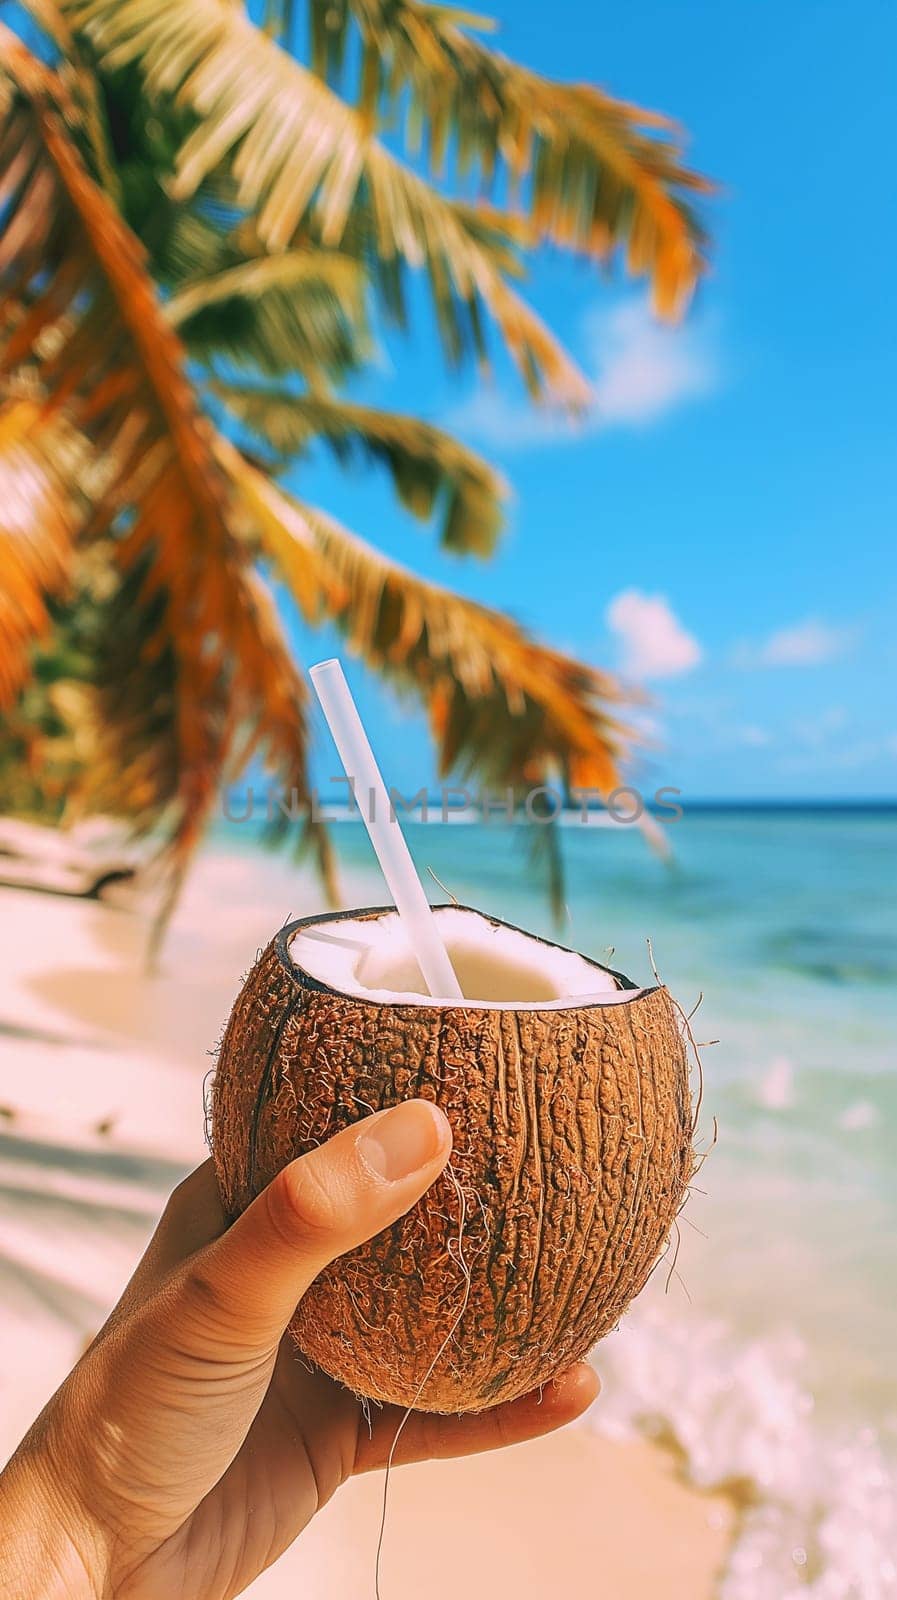 Hand holding a coconut drink on a tropical beach with clear skies and palm trees. by Hype2art